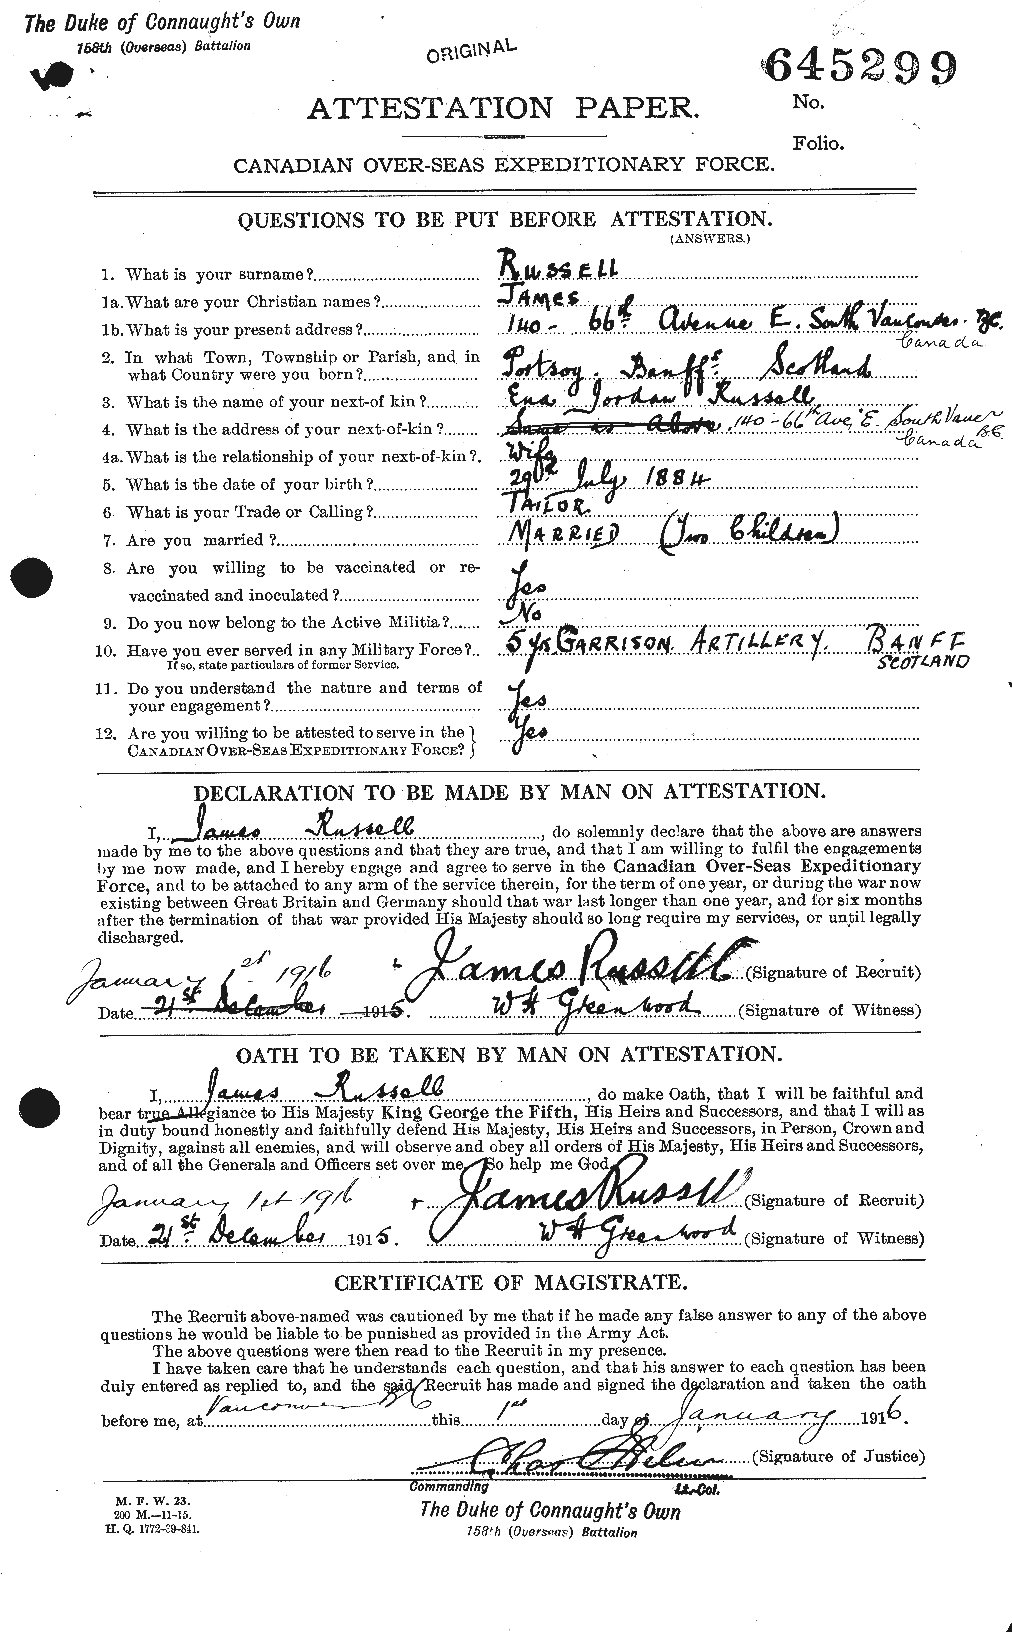 Personnel Records of the First World War - CEF 619045a